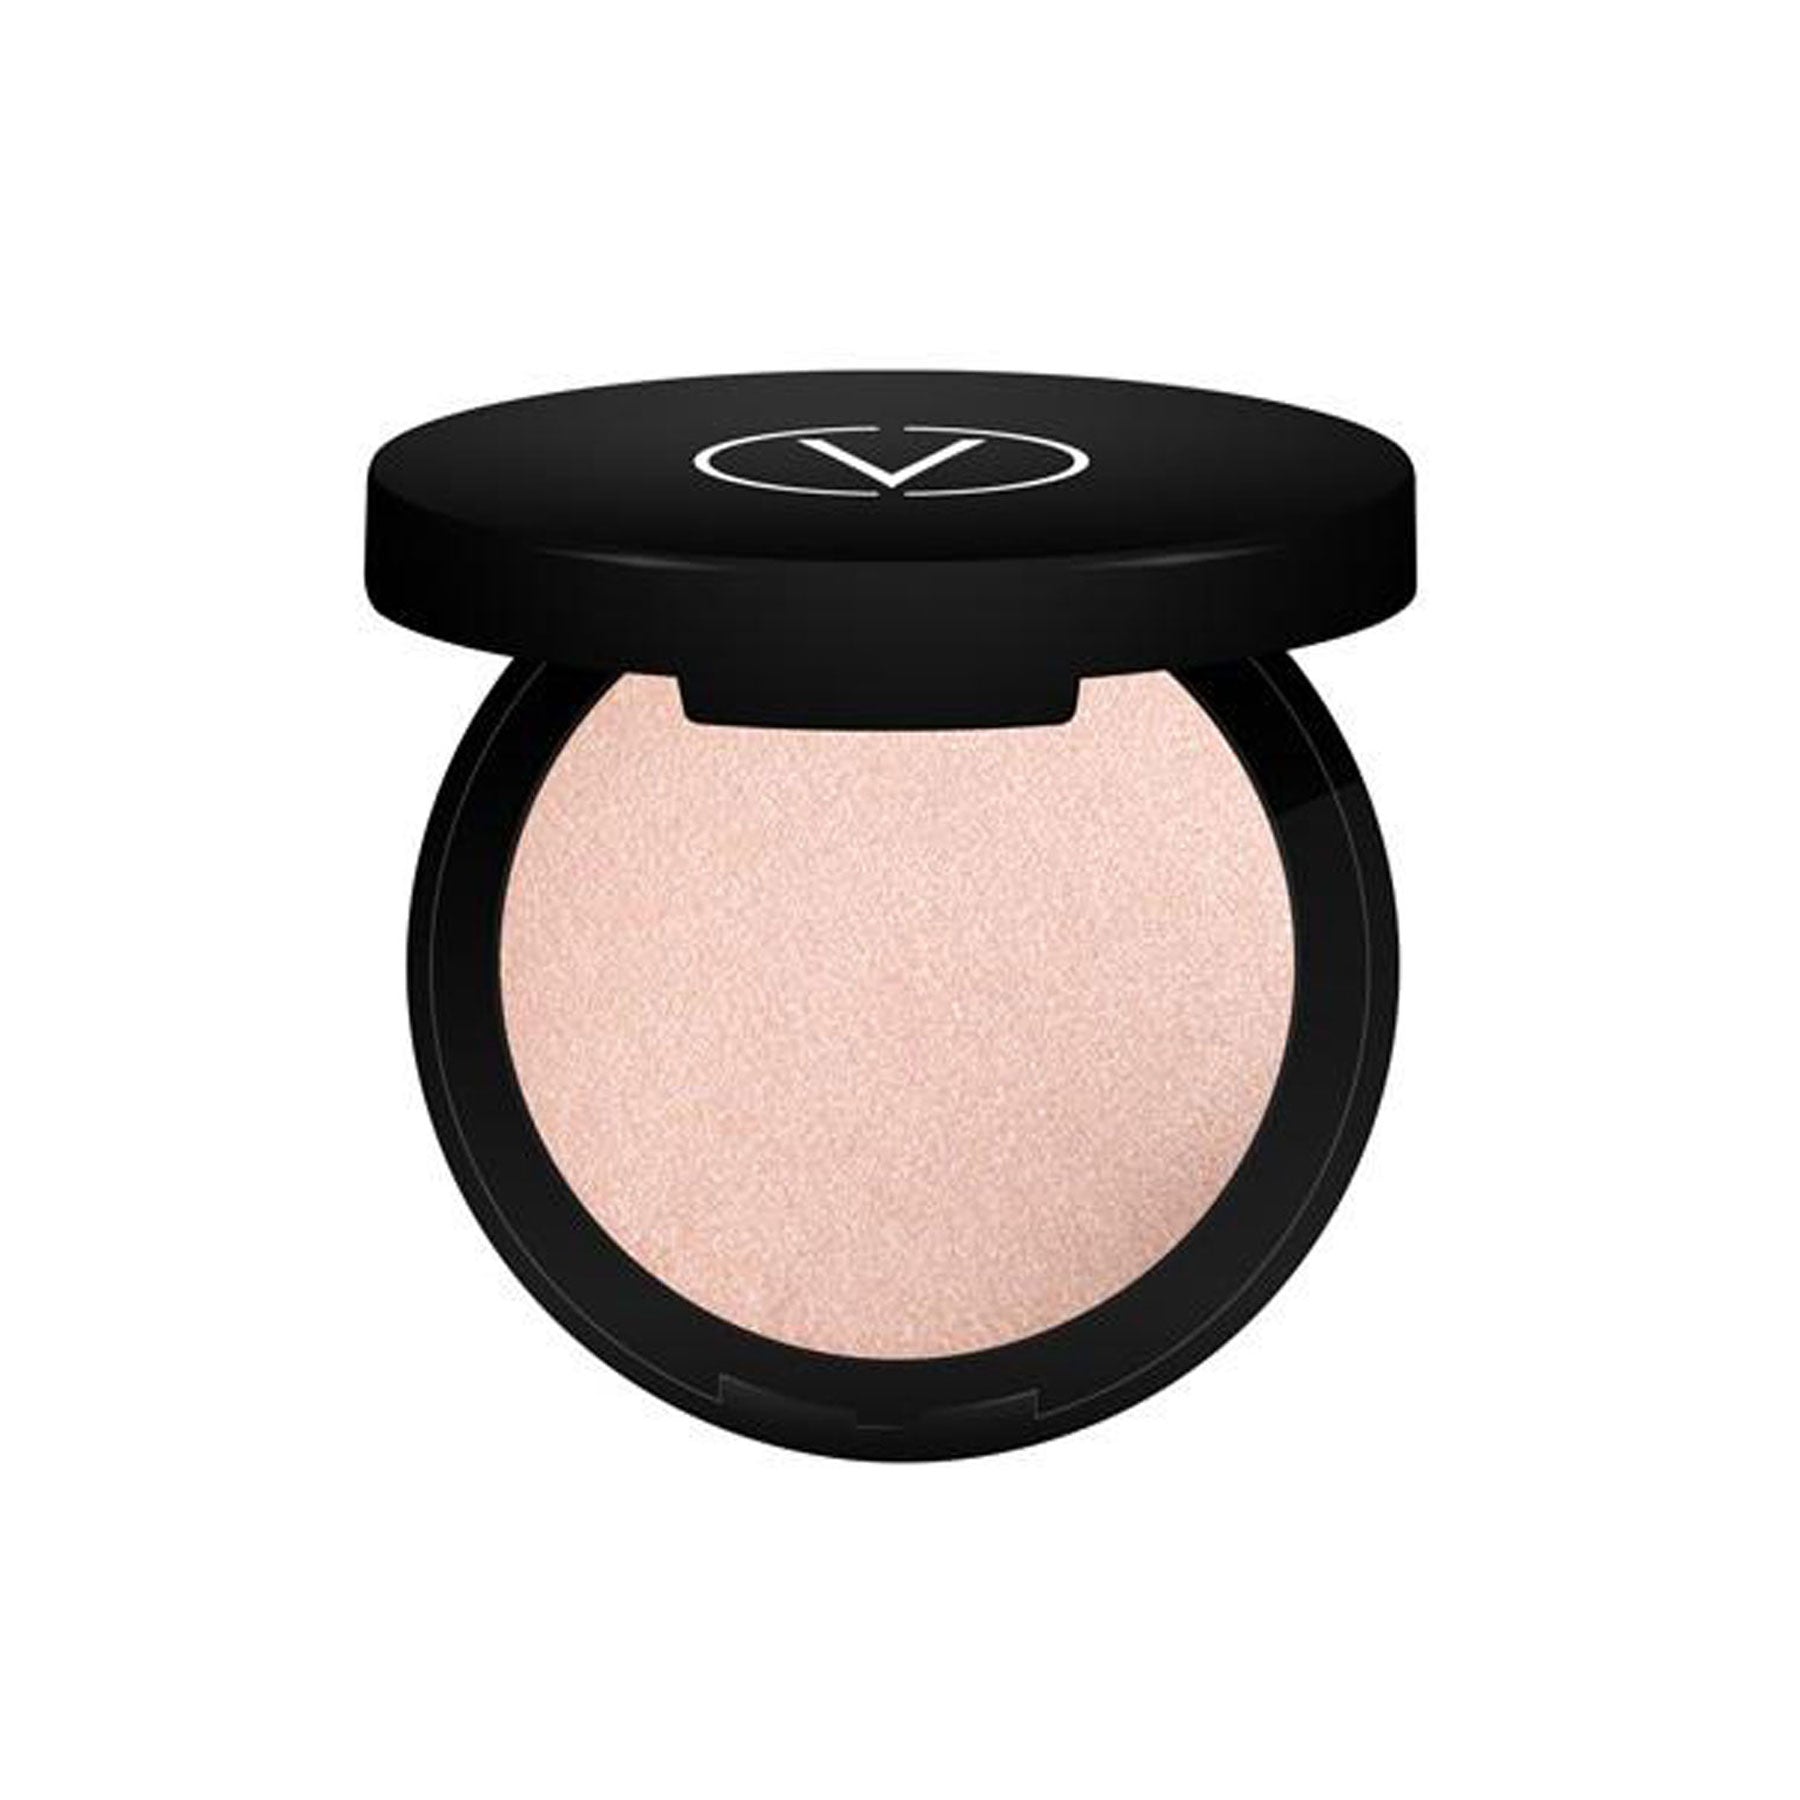 Afterglow Highlighting Powder